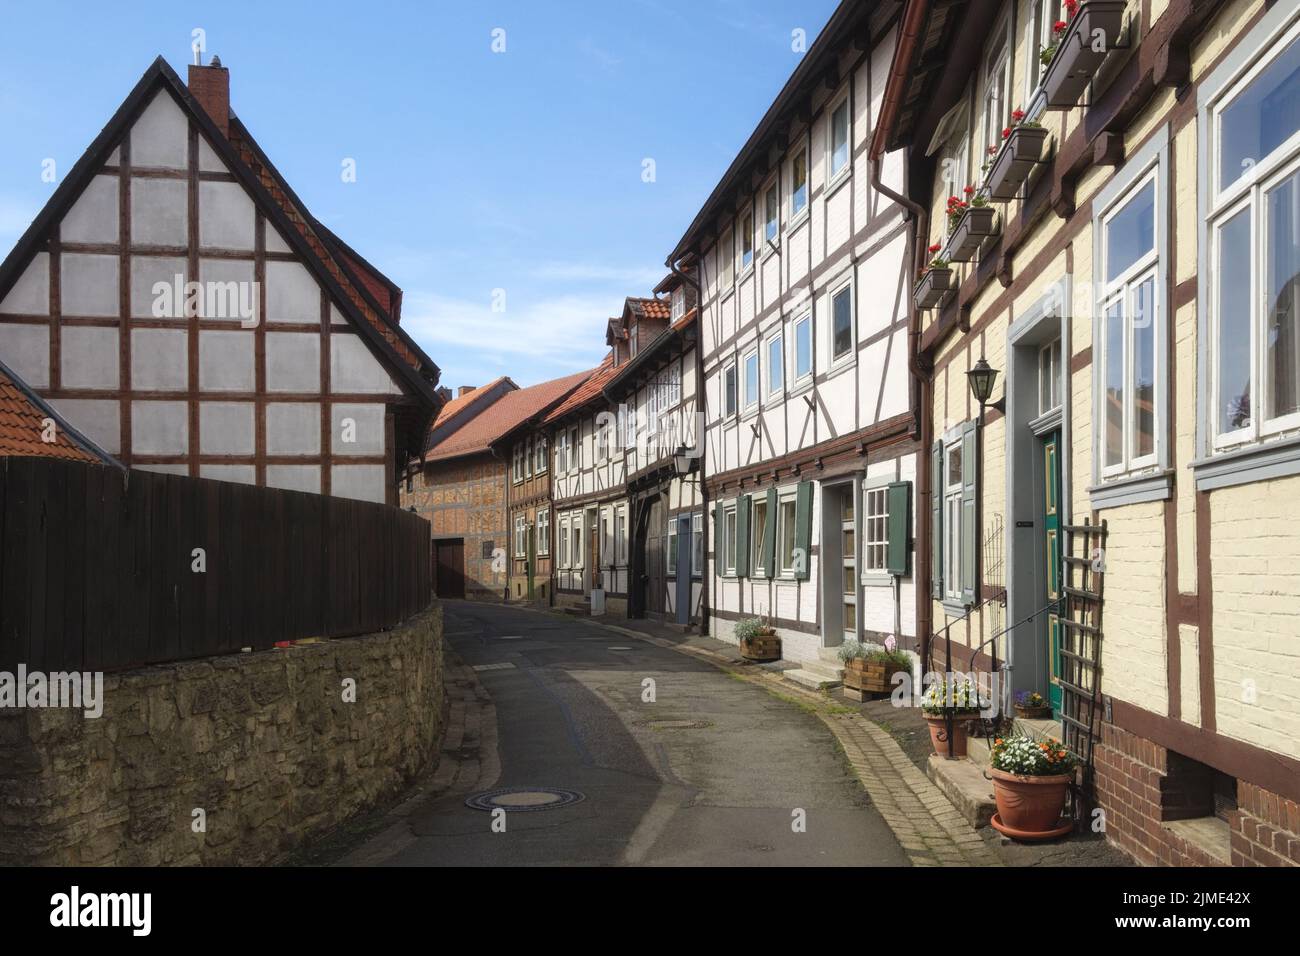 Hornburg - Historical old town, Germany Stock Photo